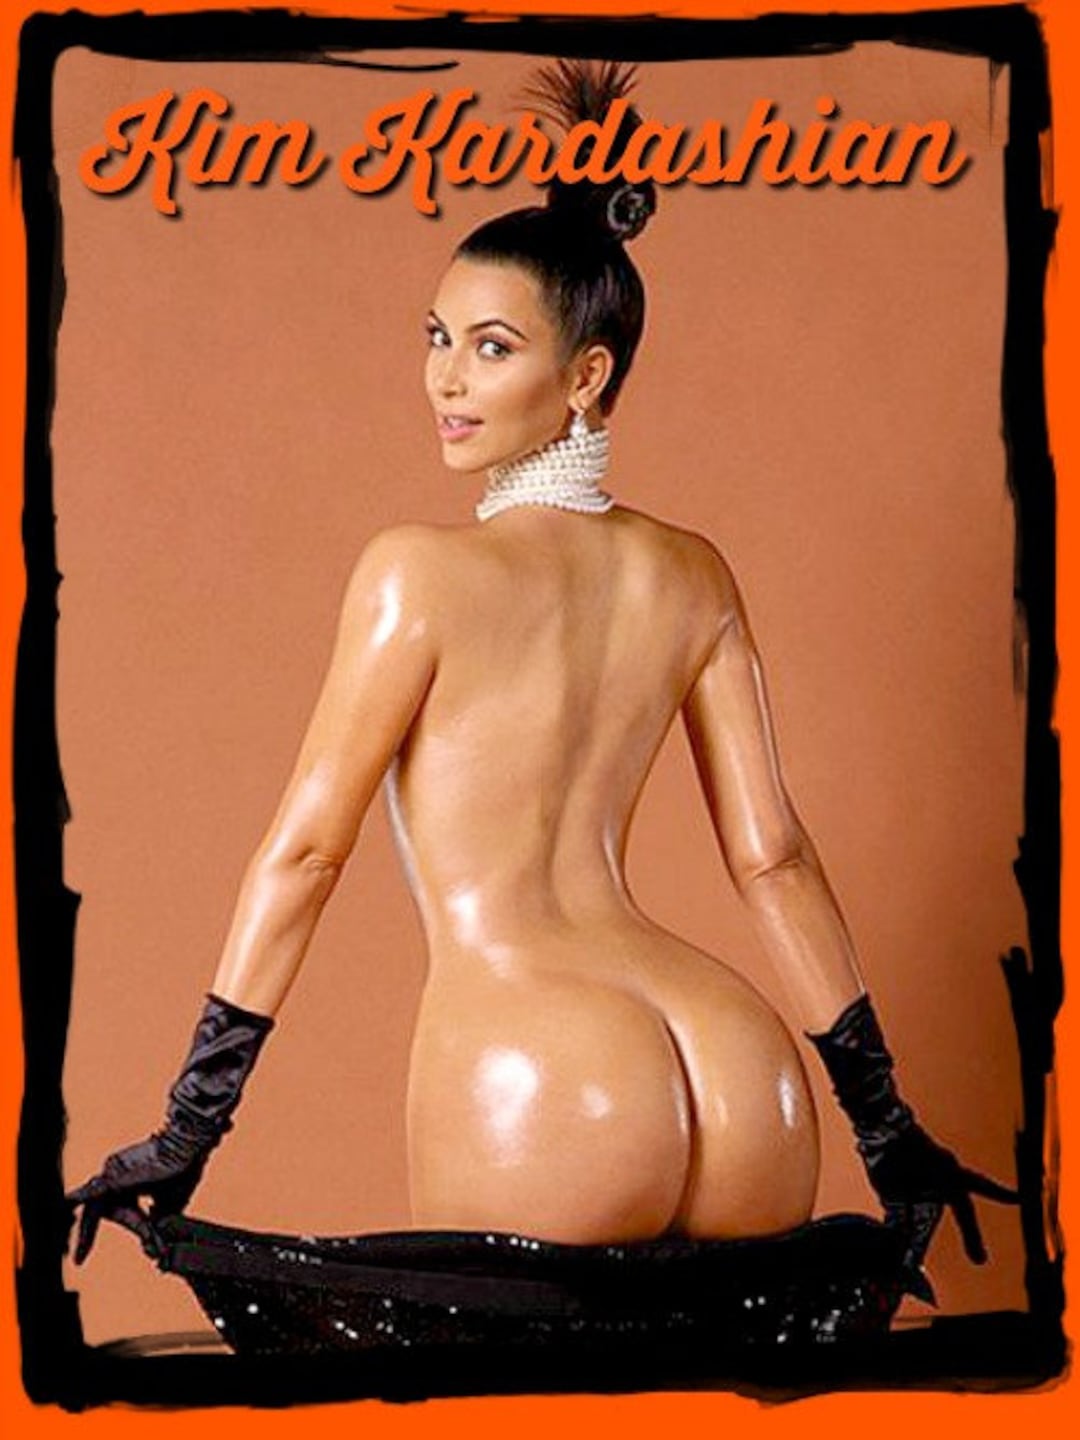 barry shue recommends kim kardashian hot nude pic